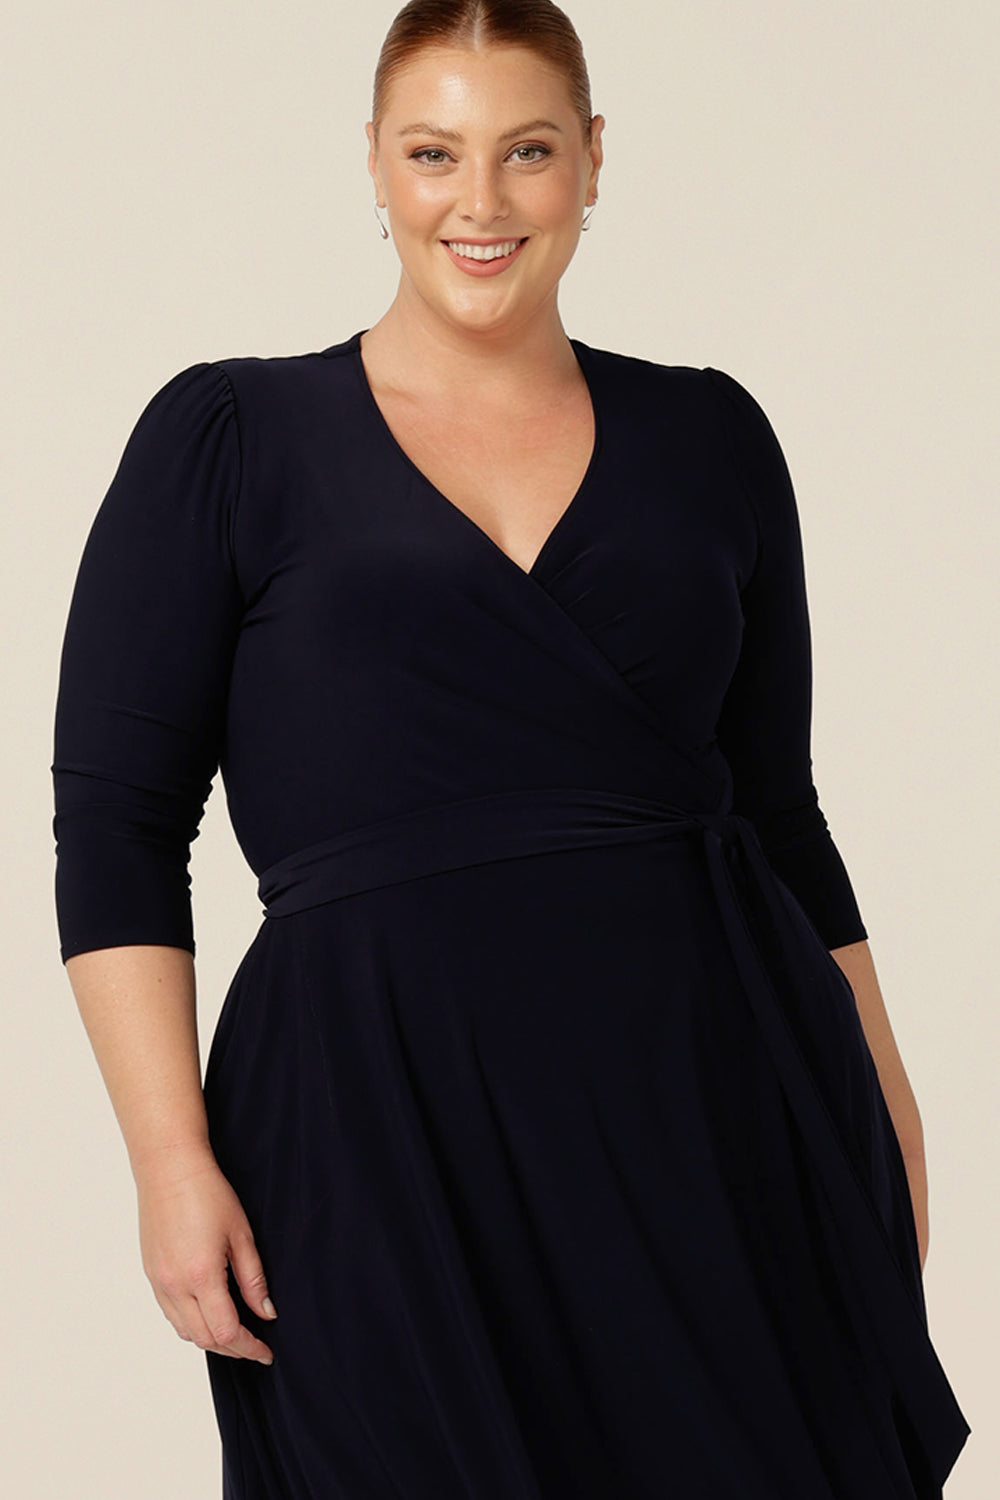 Shop jersey wrap dresses like this navy blue wrap dress, by Australia and New Zealand's wrap dress experts, L&F online for worldwide shipping.